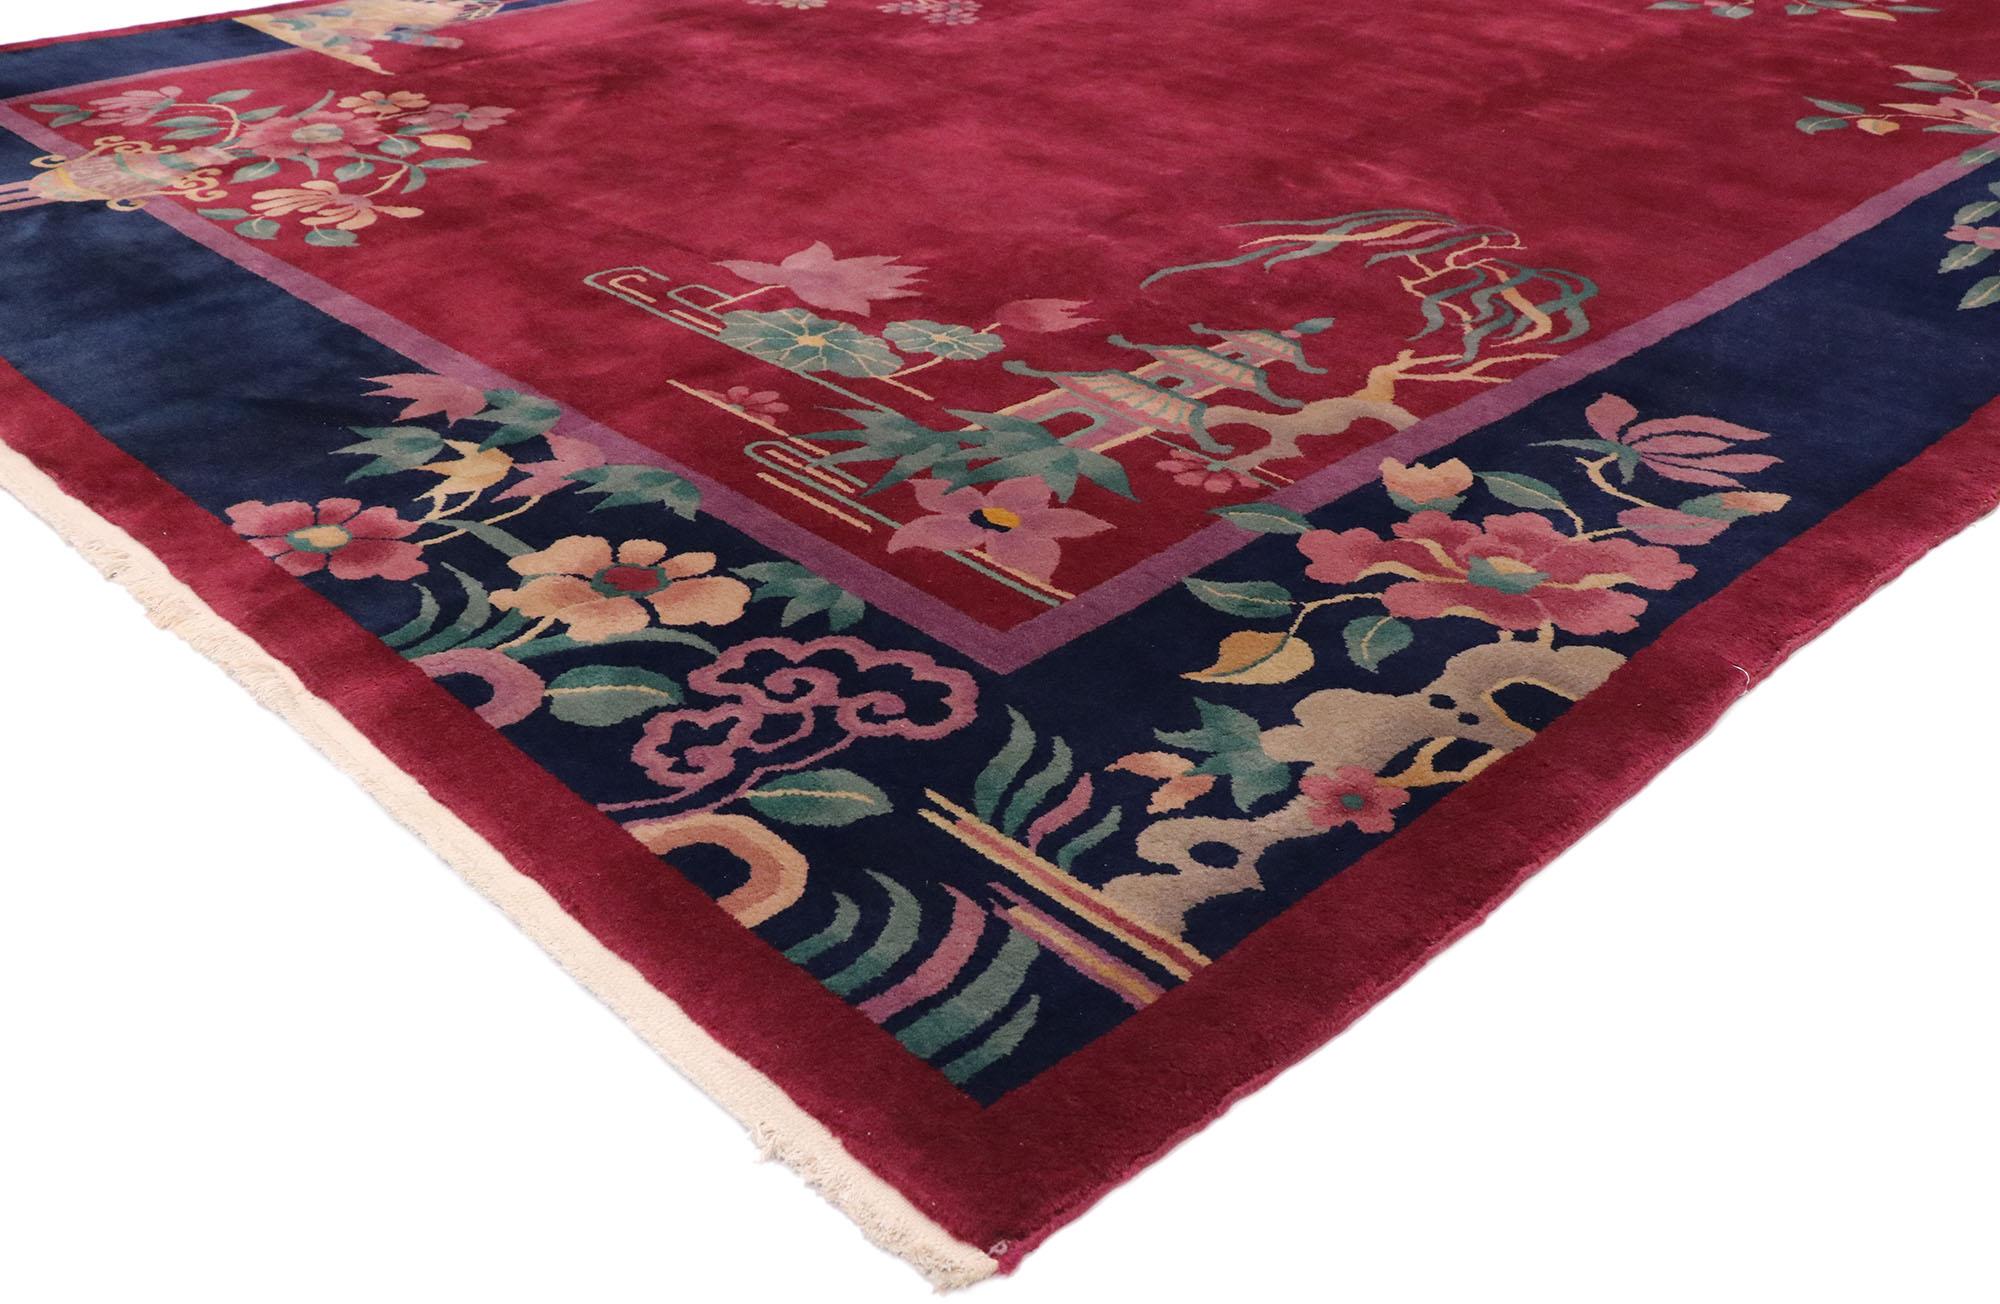 77450 antique Chinese Art Deco rug Inspired by Walter Nichols with Jazz Age style. This hand knotted wool antique Chinese Art Deco rug features a color-blocked field and border scheme festooned with large, glorious sprays of flowers. Lotuses,